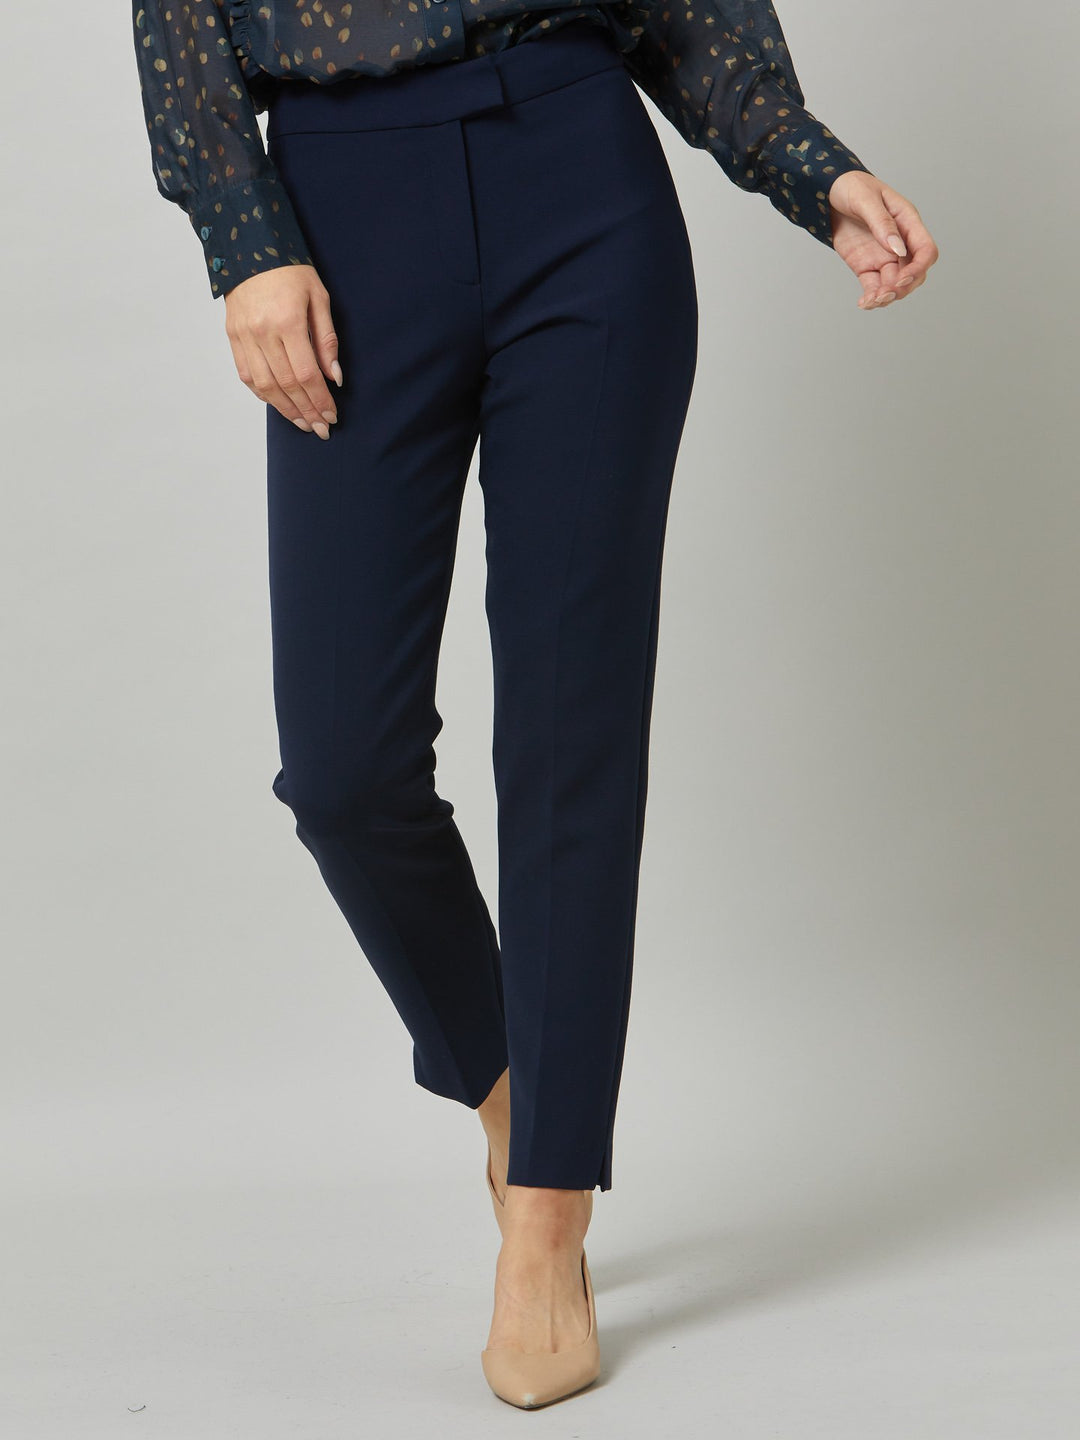 Jill makes a triumphant return! These narrow leg trousers are a must-have for investment-worthy style, providing a sleek and impeccably tailored silhouette. Made with a touch of stretch, they offer not only a polished look but also enhanced comfort. With an ankle-grazing length, a fly front, and a clean flat front that sits naturally on the waist, these trousers exude sophistication.